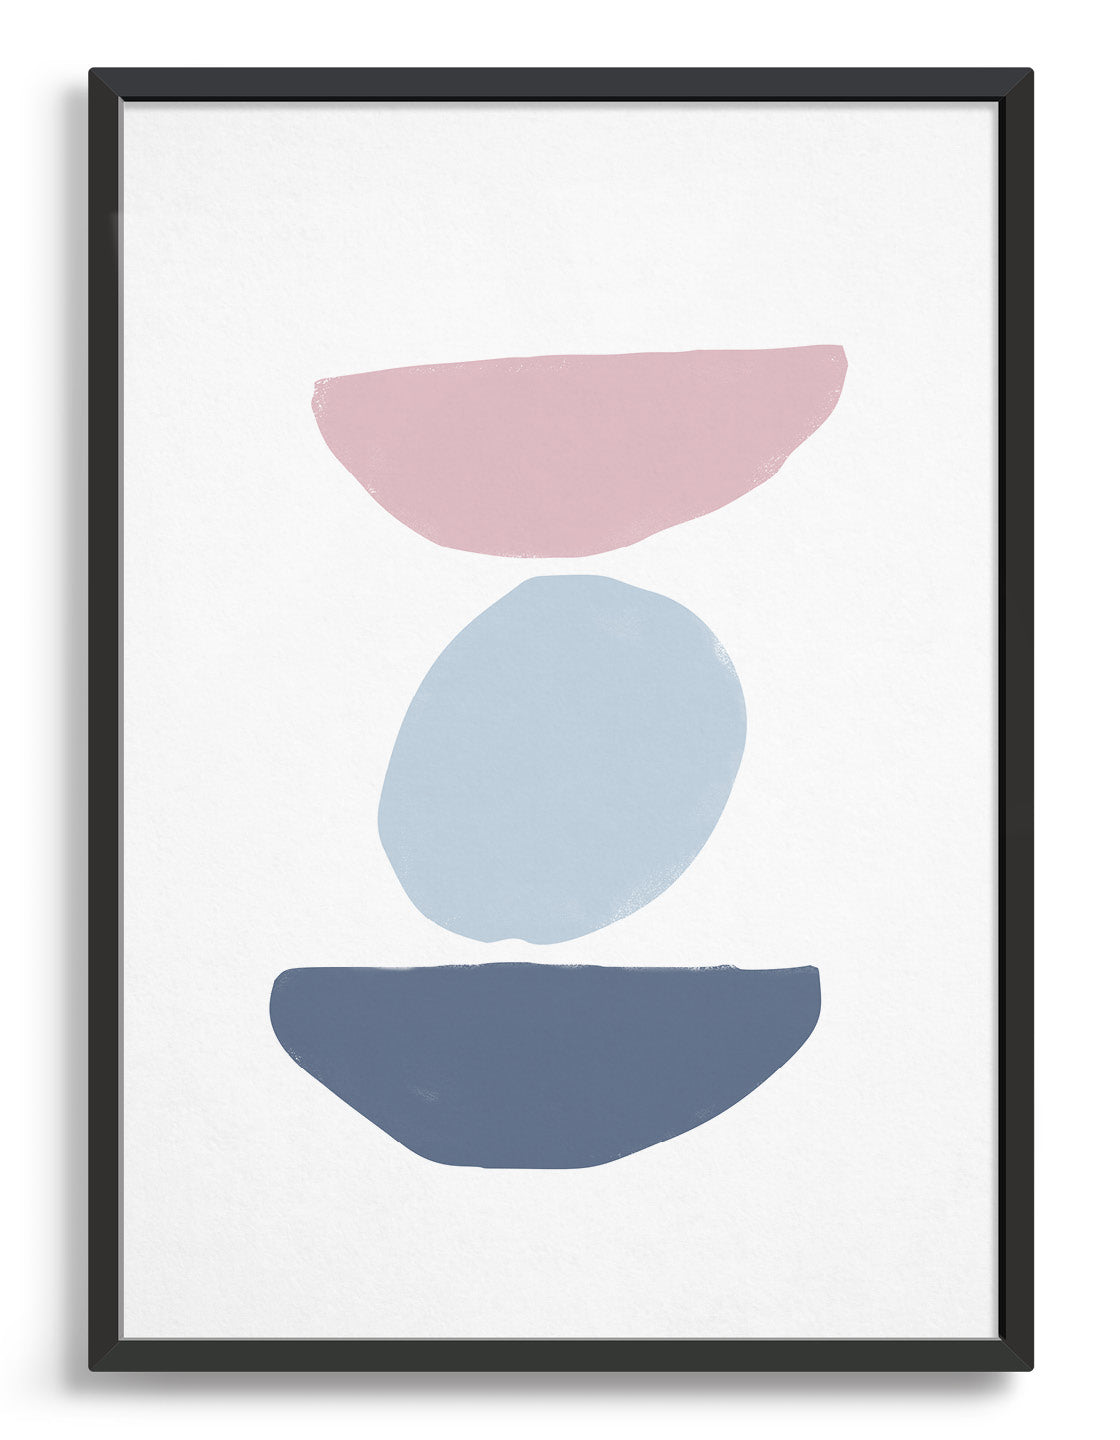 scandi inspired natural artprint depicting coloured shapes stacked on top of each other. Pink semi circle on top of a pale blue circle on top of a blue/grey semi circle